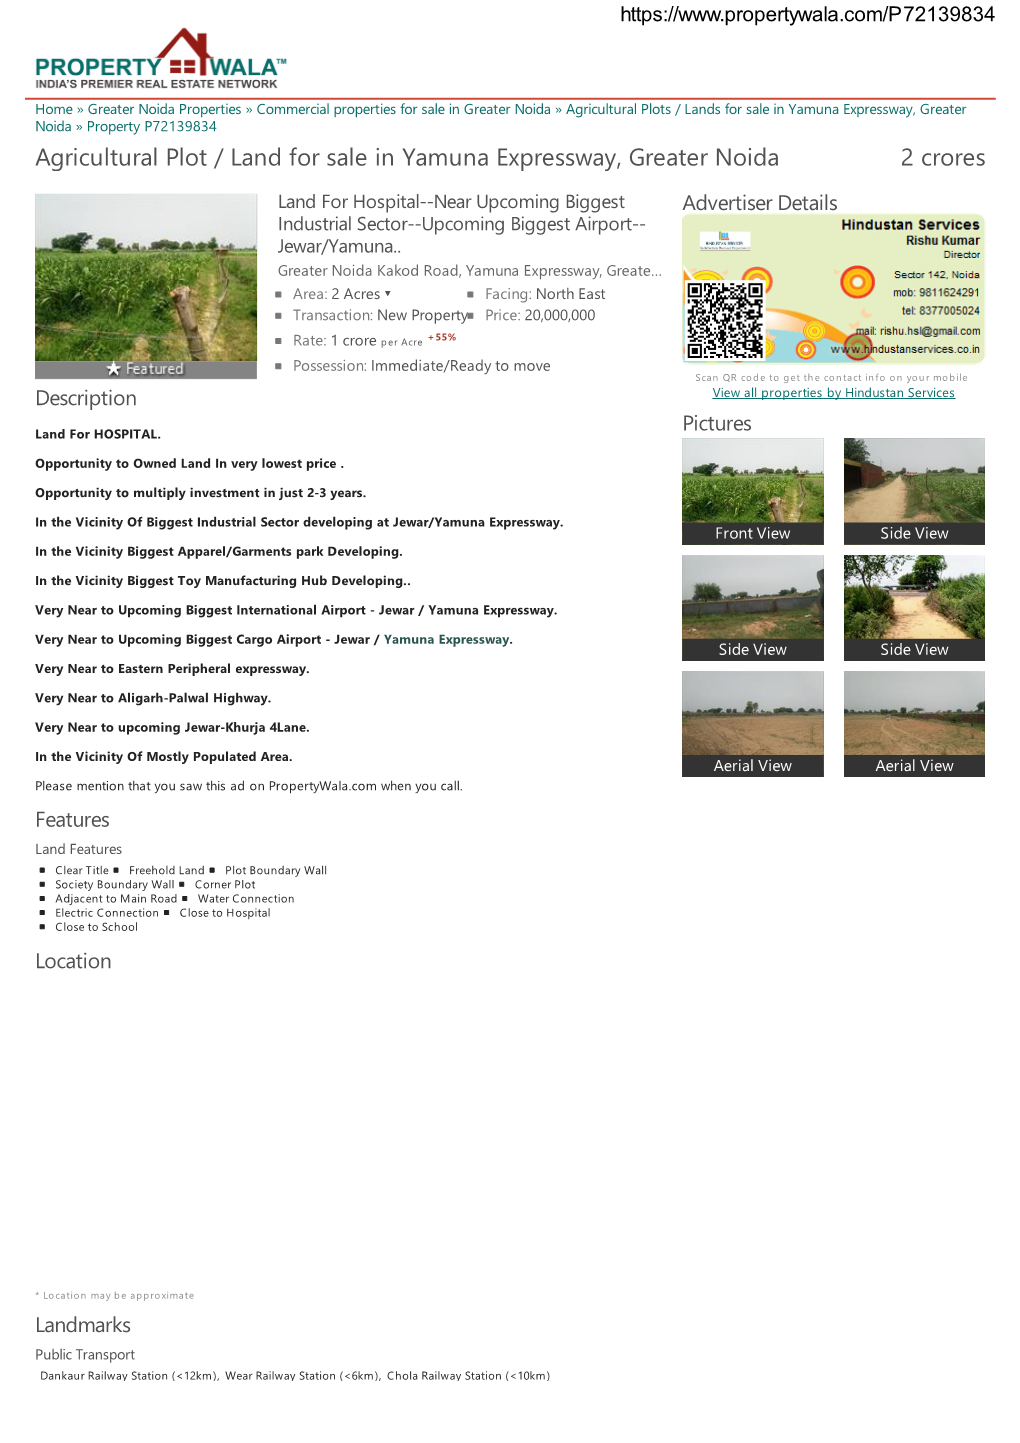 Agricultural Plot / Land for Sale in Yamuna Expressway, Greater